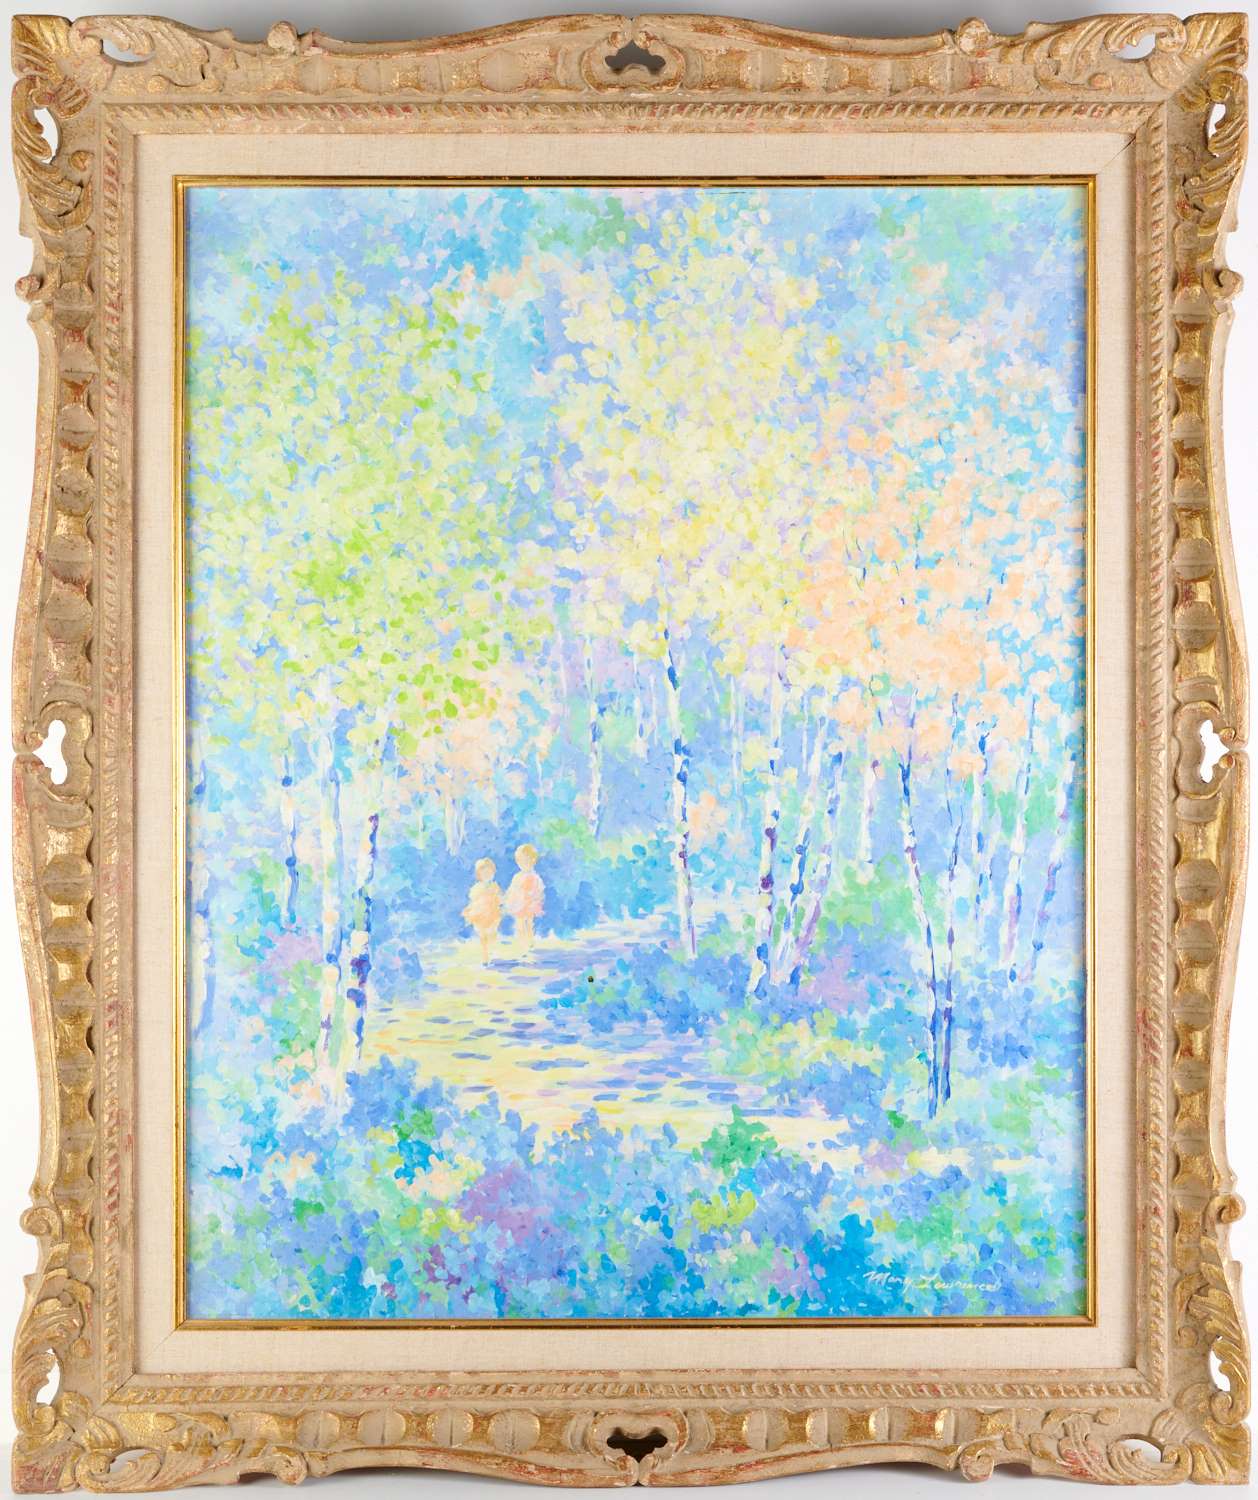 MARY LAWRENCE IMPRESSIONIST PAINTING 361d80